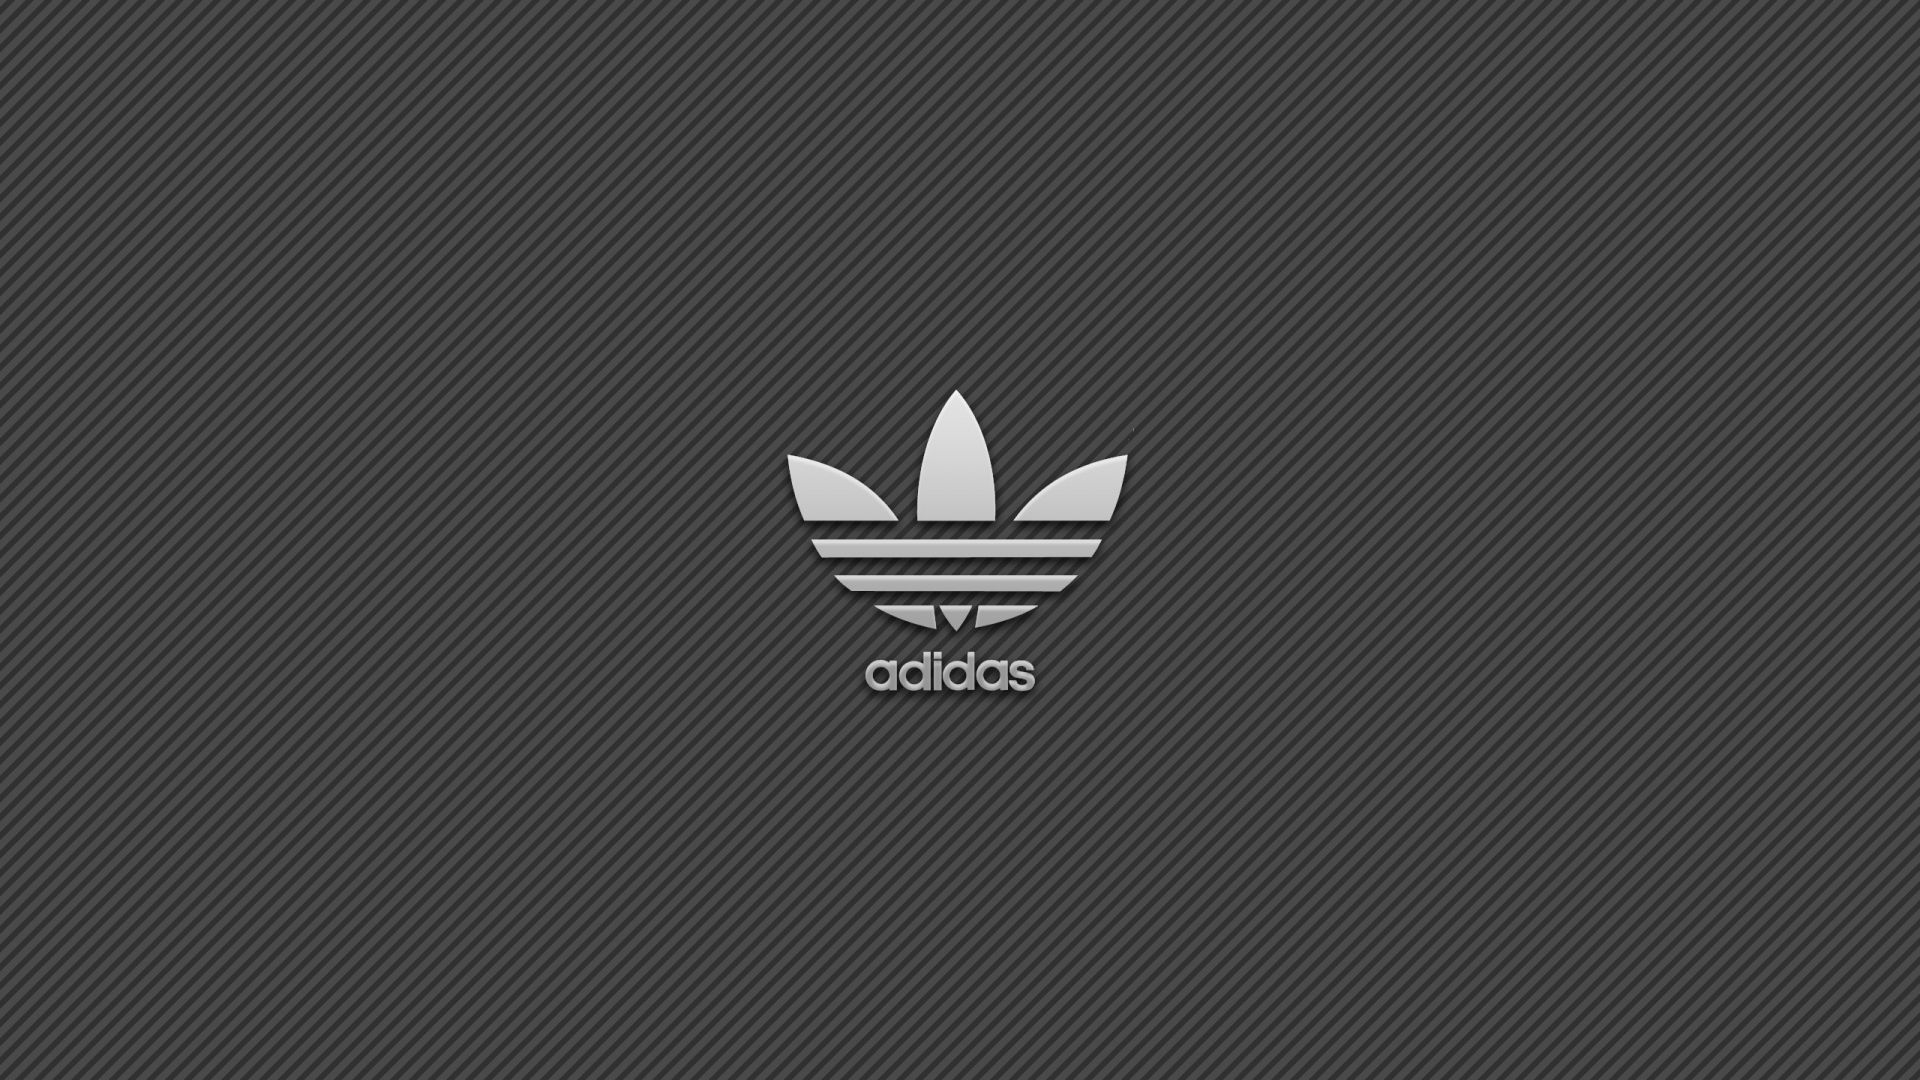 Download Wallpaper 1920x1080 adidas, firms, sports, clothes, shoes, accessories Full HD 1080p HD Backgr. Adidas originals logo, Adidas logo art, Adidas wallpaper